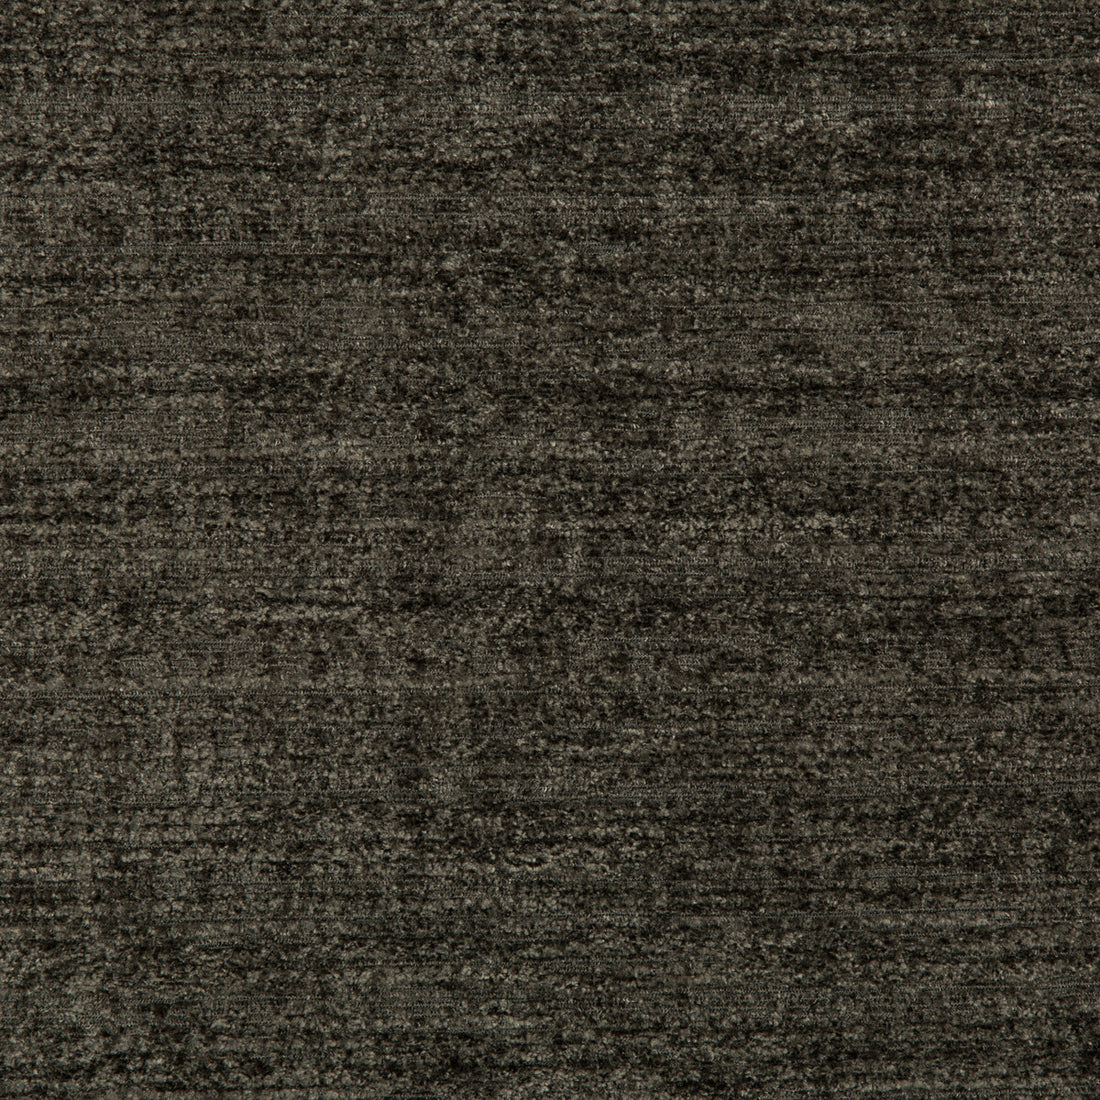 Kravet Smart fabric in 35779-21 color - pattern 35779.21.0 - by Kravet Smart in the Performance collection